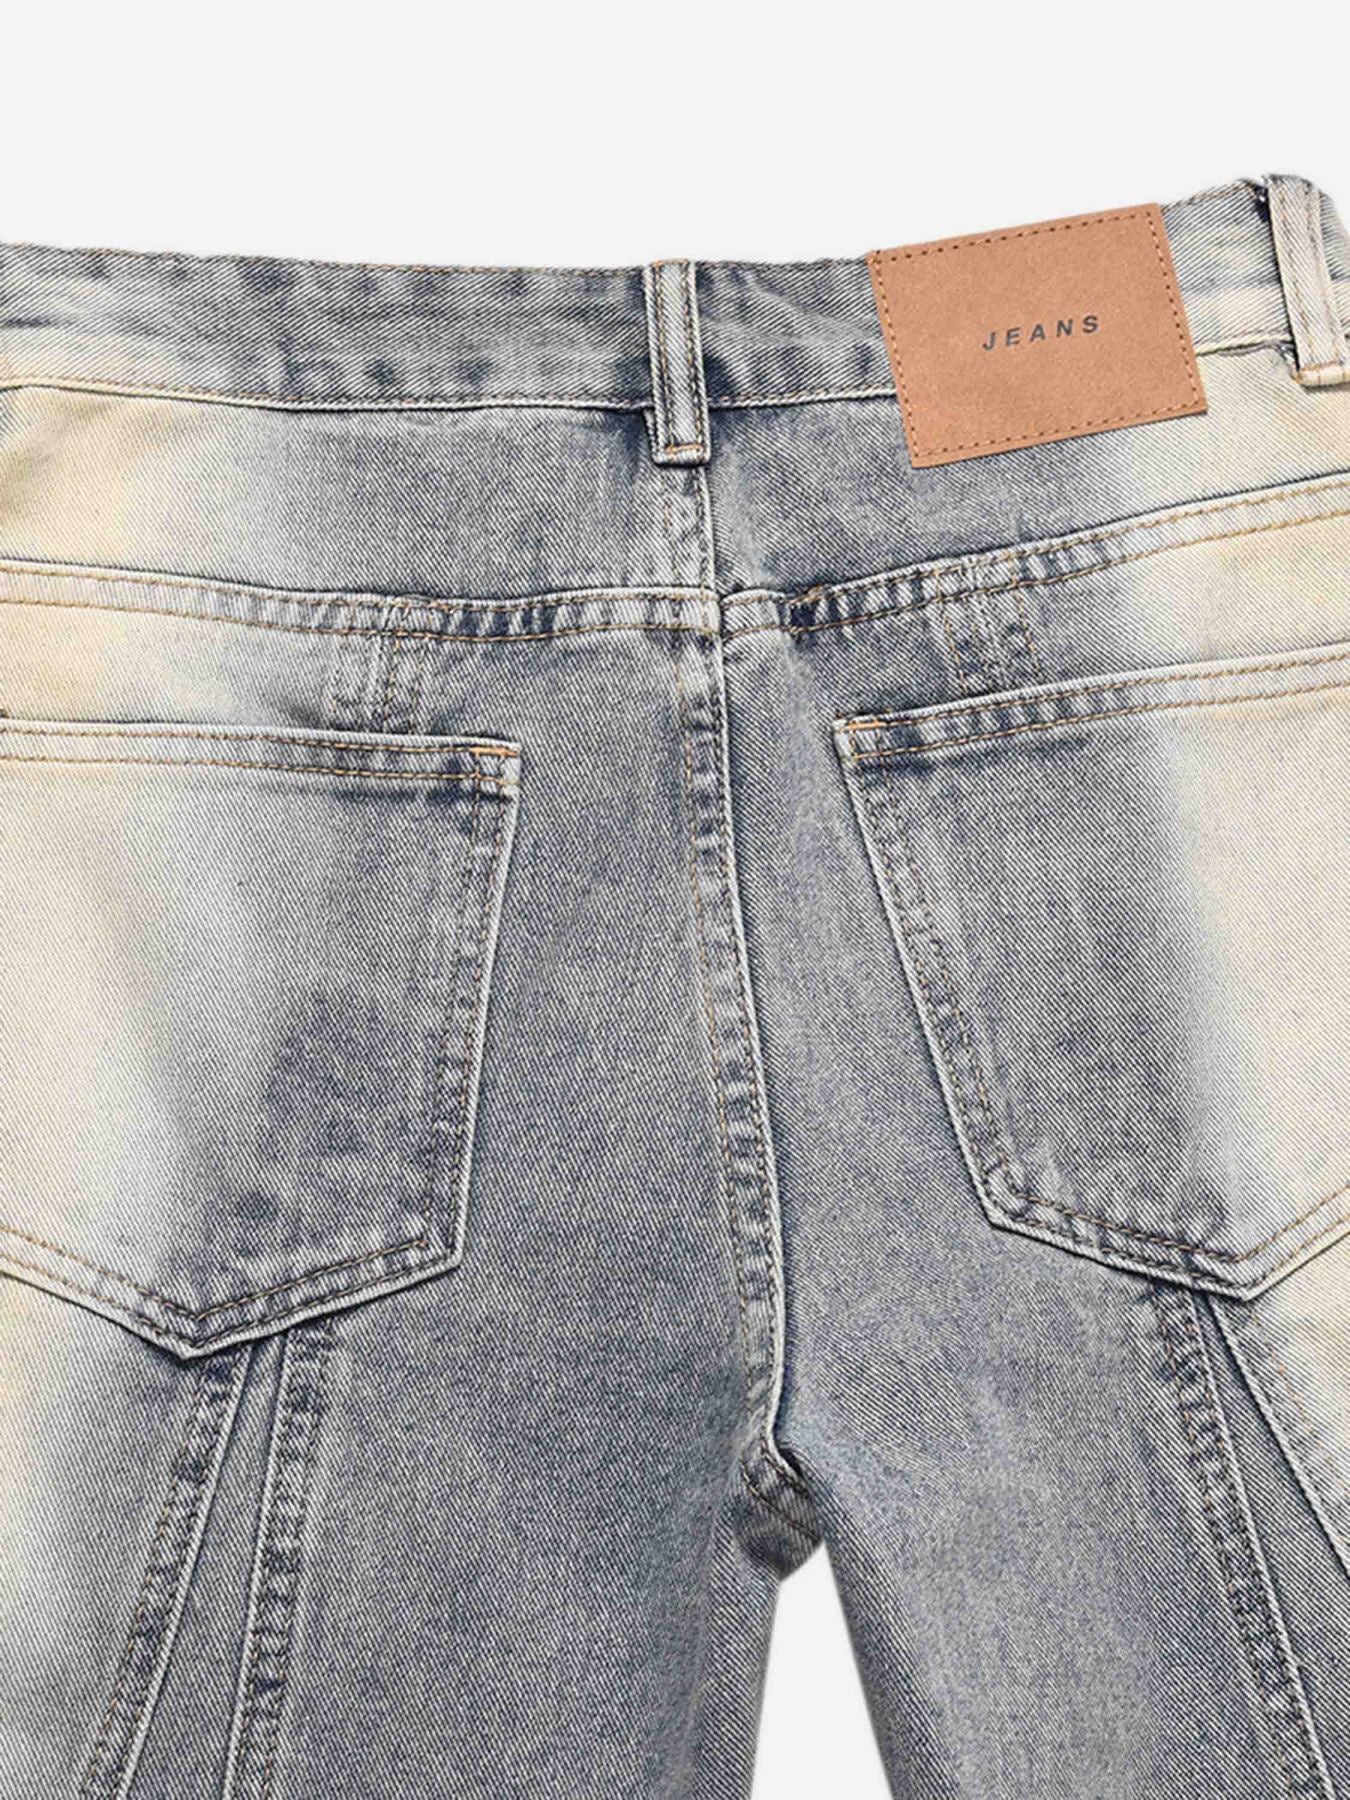 The Supermade Wash Water To Make Old Spray-painted Baggy Jeans